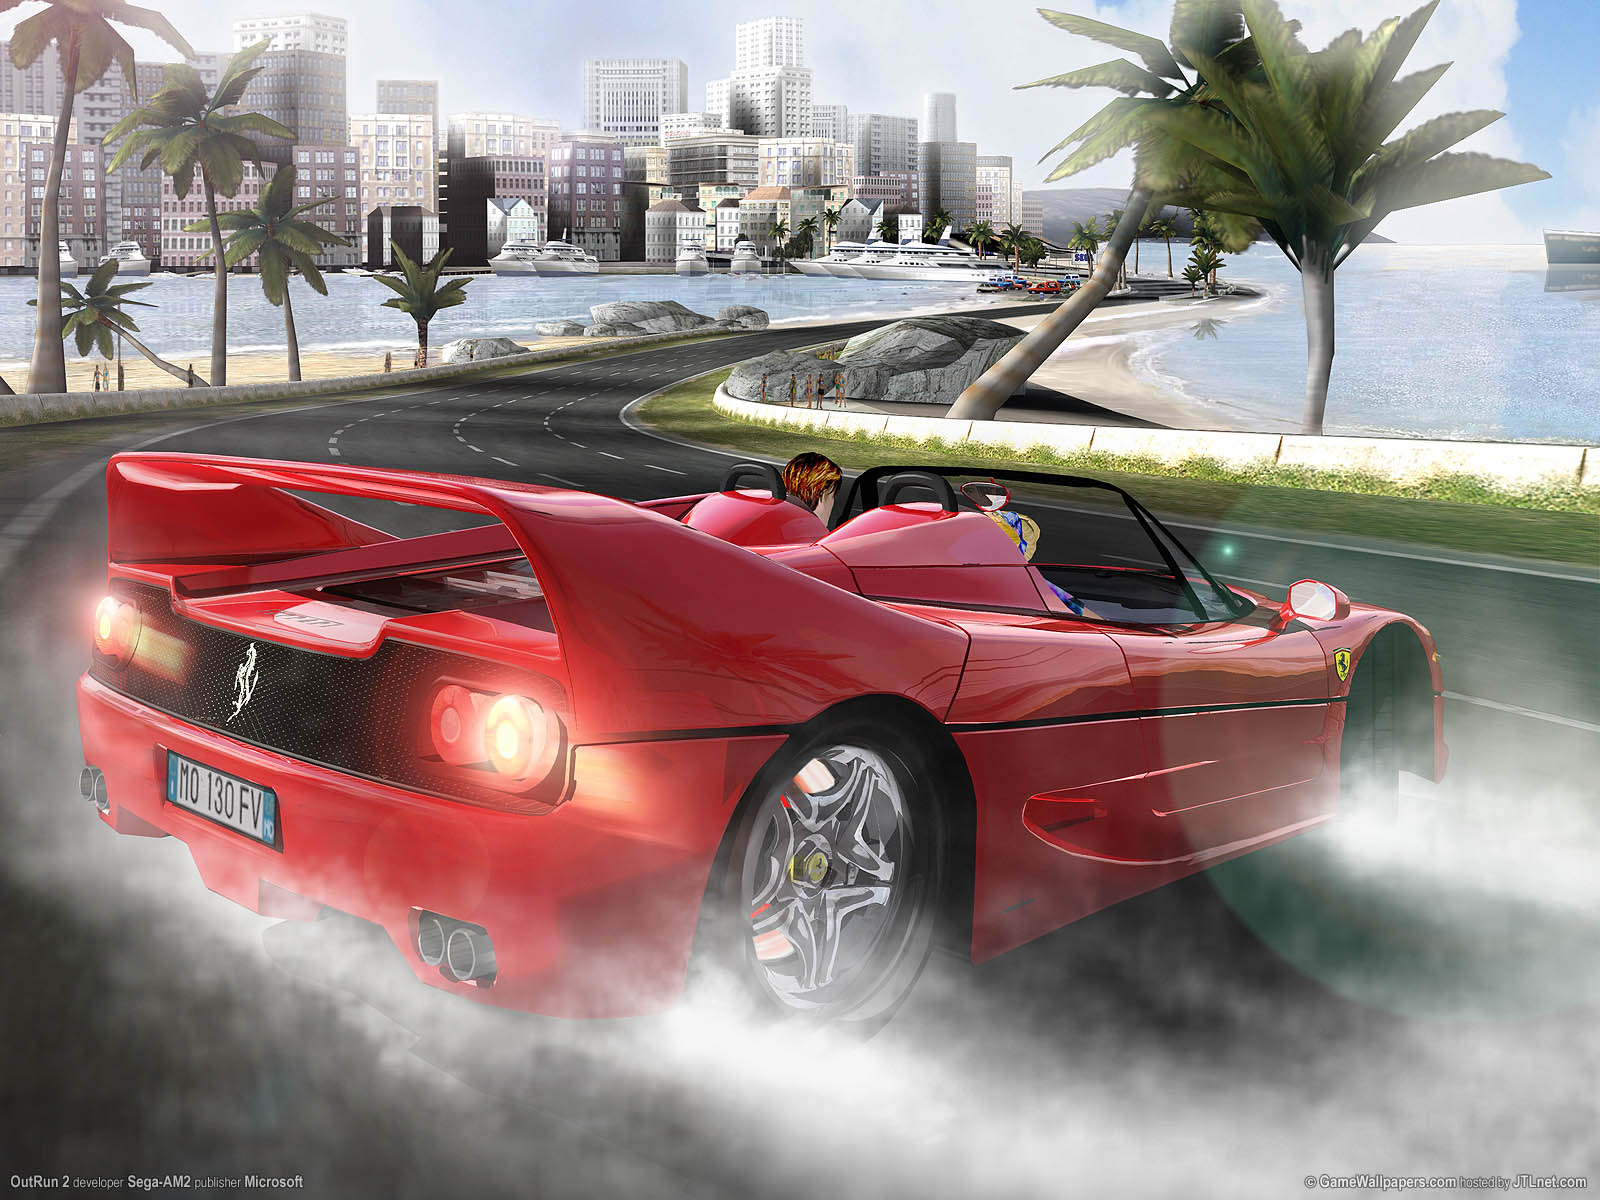 Awesome Moving Car Desktop Wallpaper Hd Images A Red Fastmoving For ...